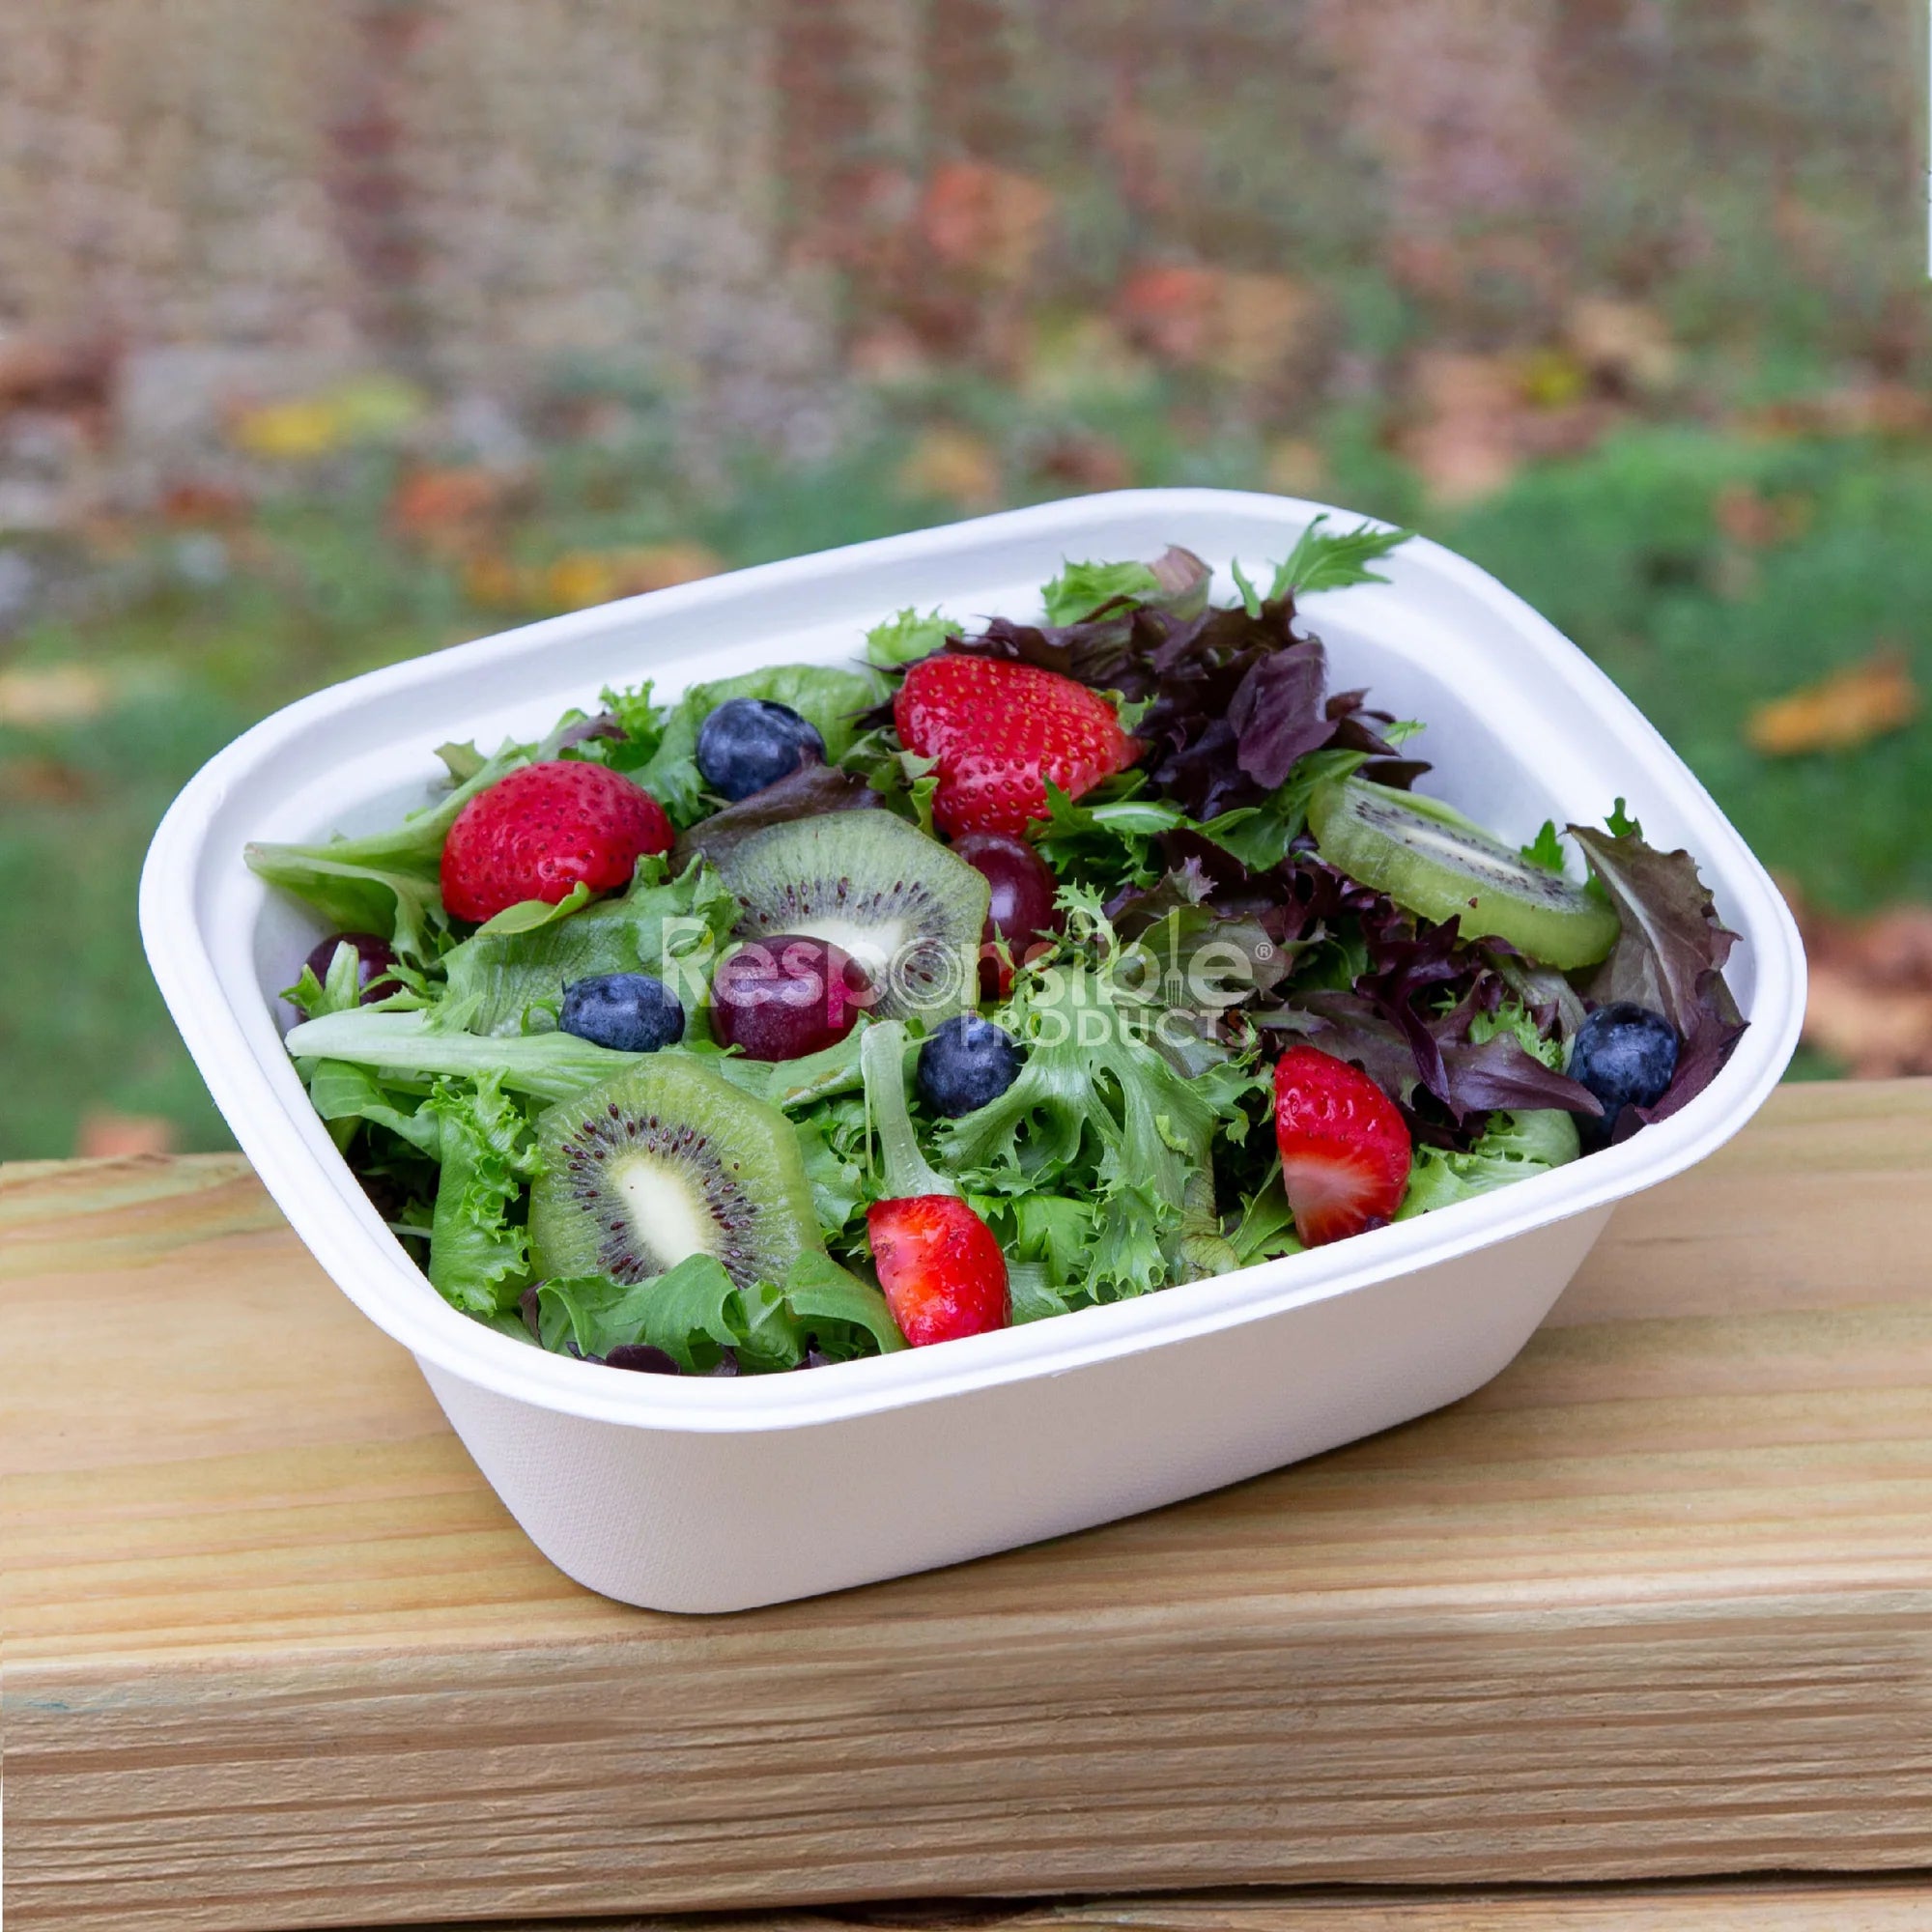 Eco-Products EP-SBS64 64 oz. Clear Compostable Plastic Salad Bowl with Lid  - 150/Case